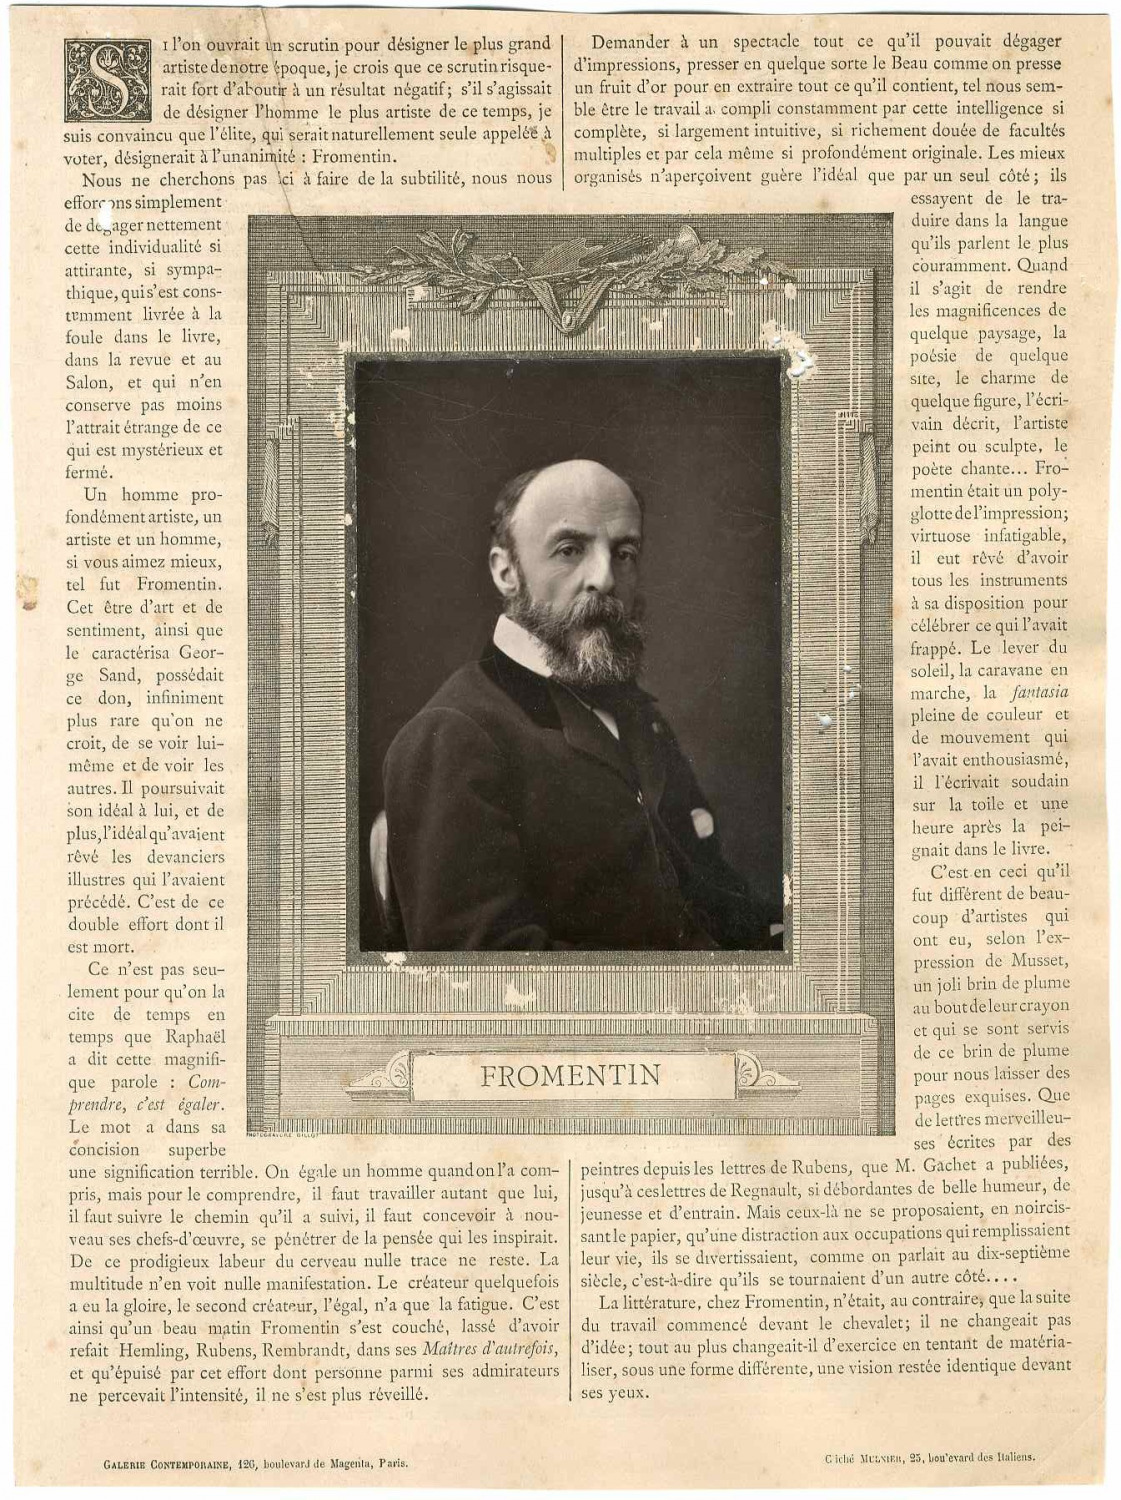 Eugène Fromentin (1820 - 1876), French painter and writer Photoglyptie d